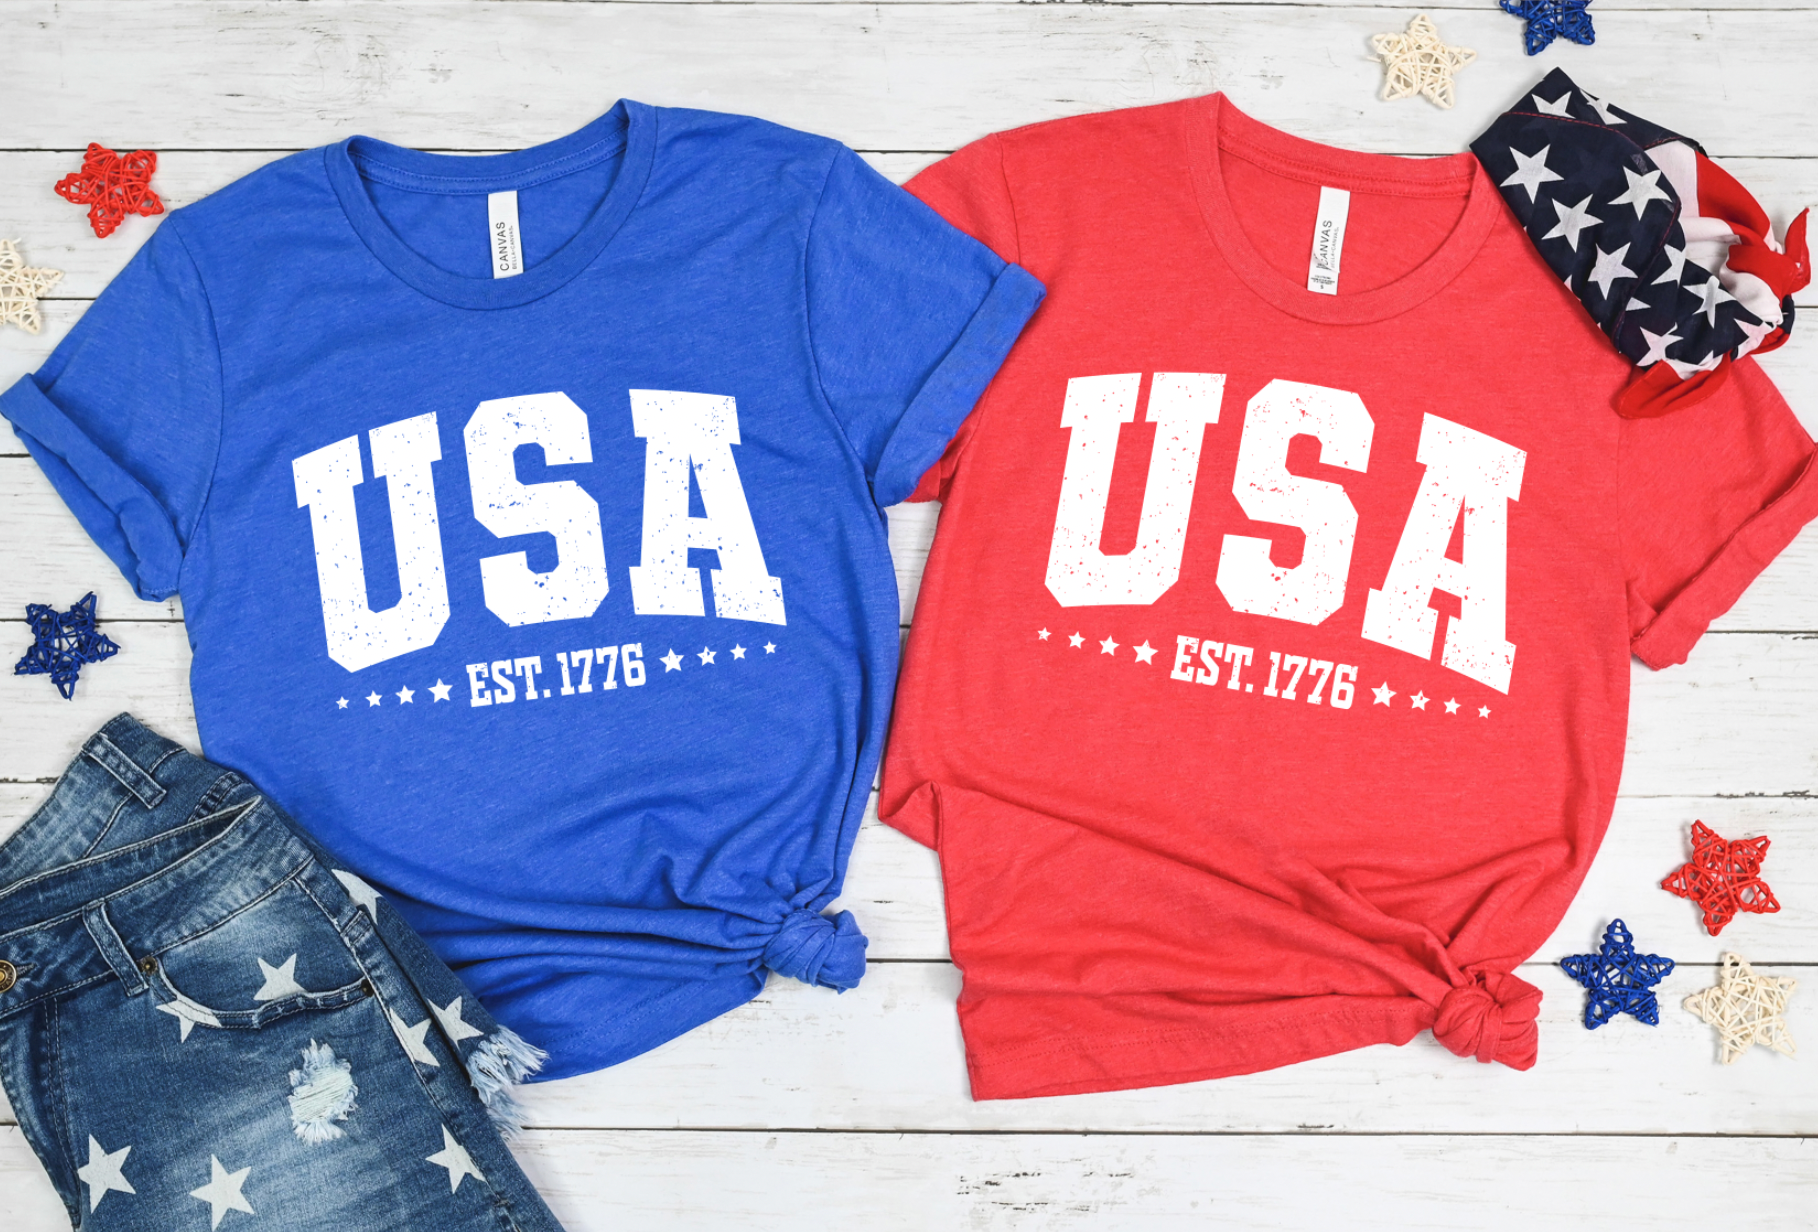 USA Est. 1776 with stars on a classic heathered red and blue Bella and Canvas tshirt. Americana 4th of July graphic tee.